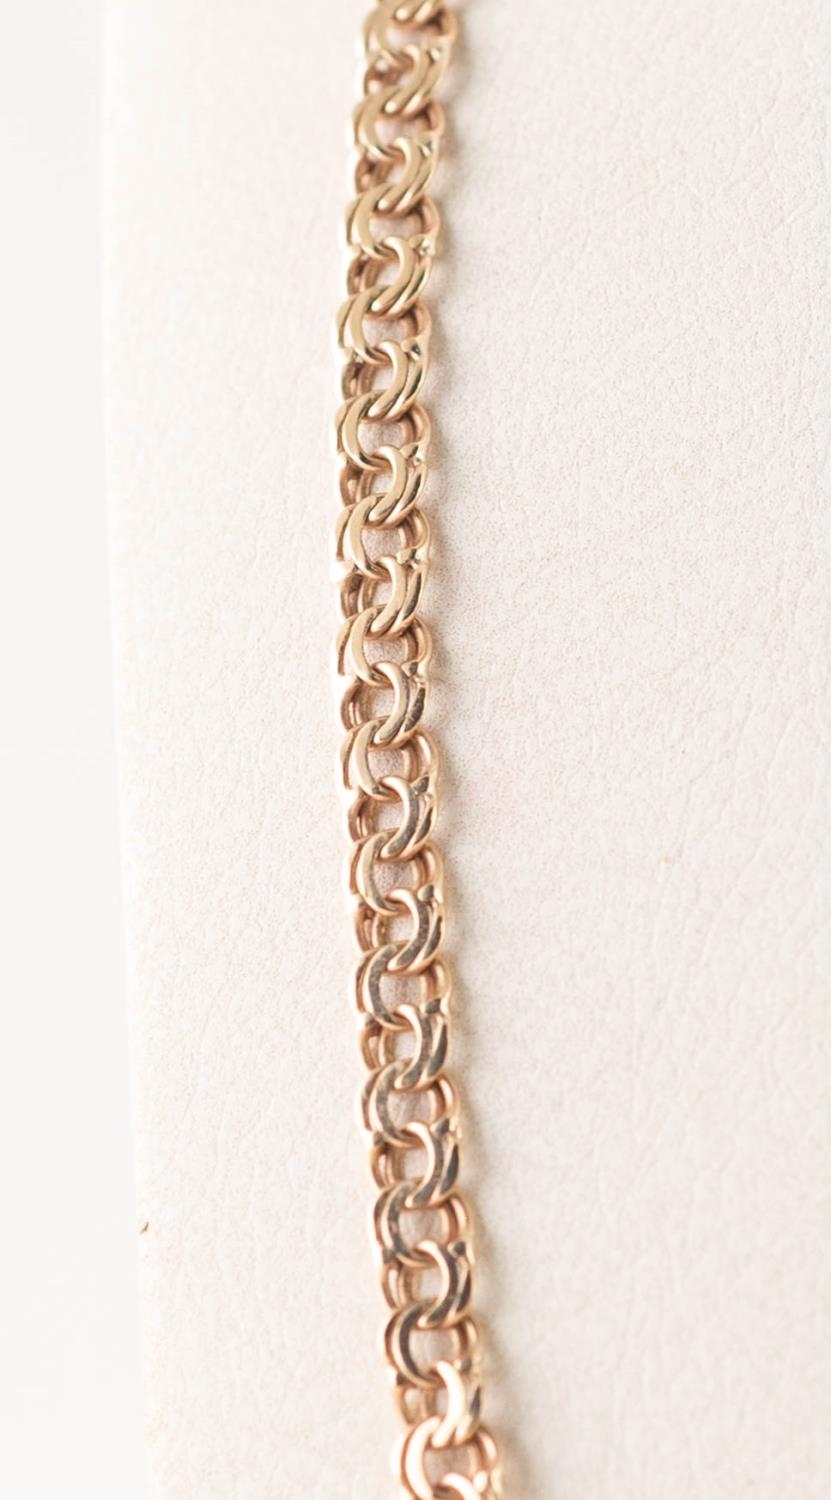 9ct GOLD FLATTENED-LINK CHAIN NECKLACE, 10.5 grm - Image 2 of 4